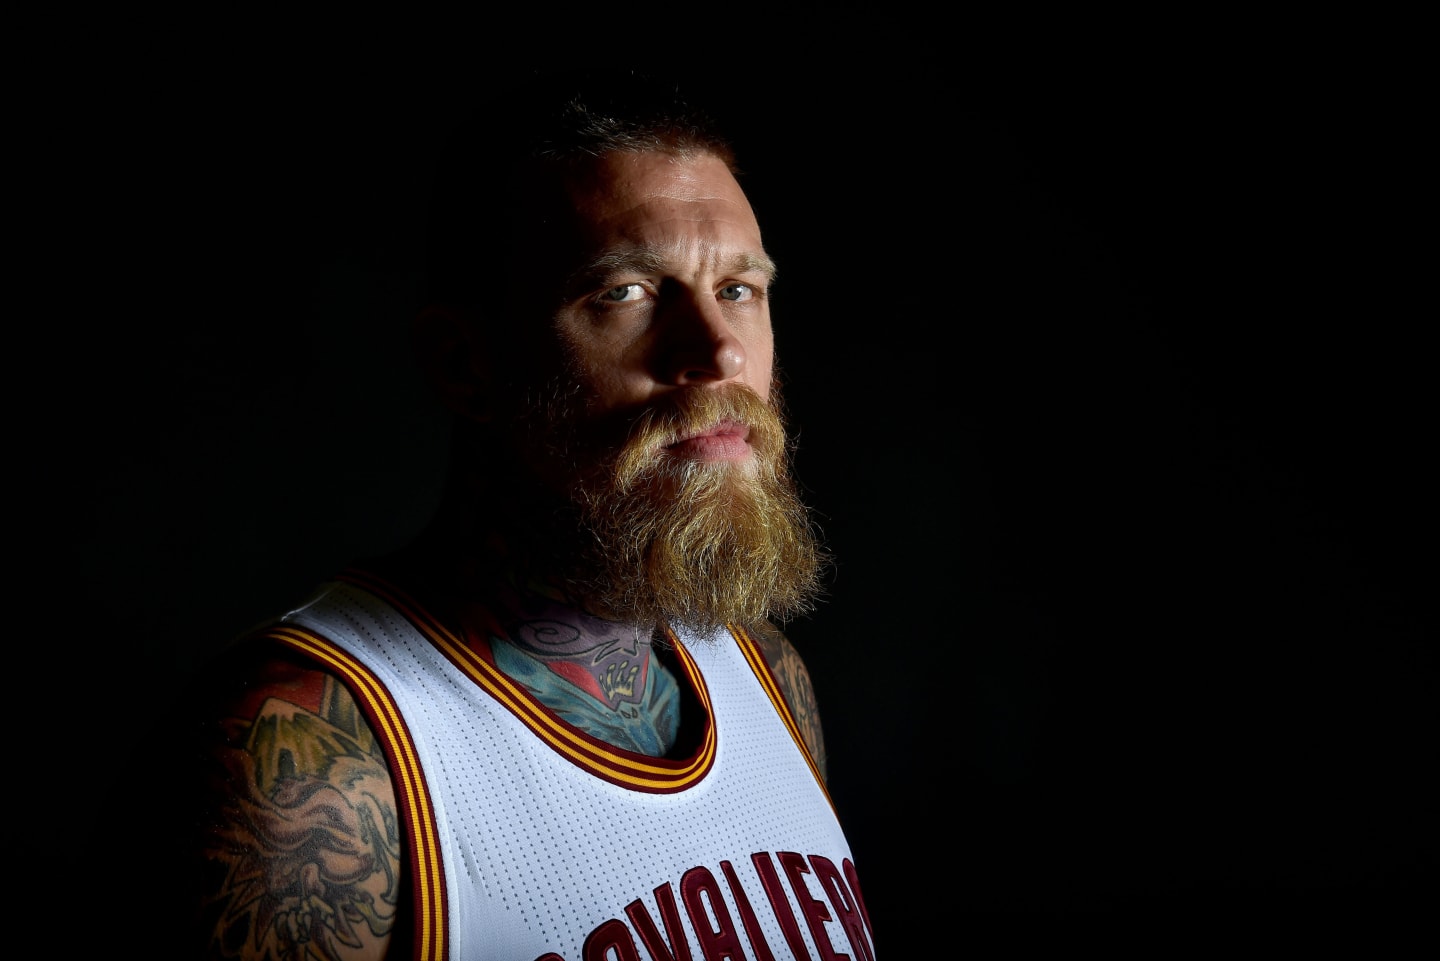 AP source: Cavaliers agree to deal with Chris Andersen